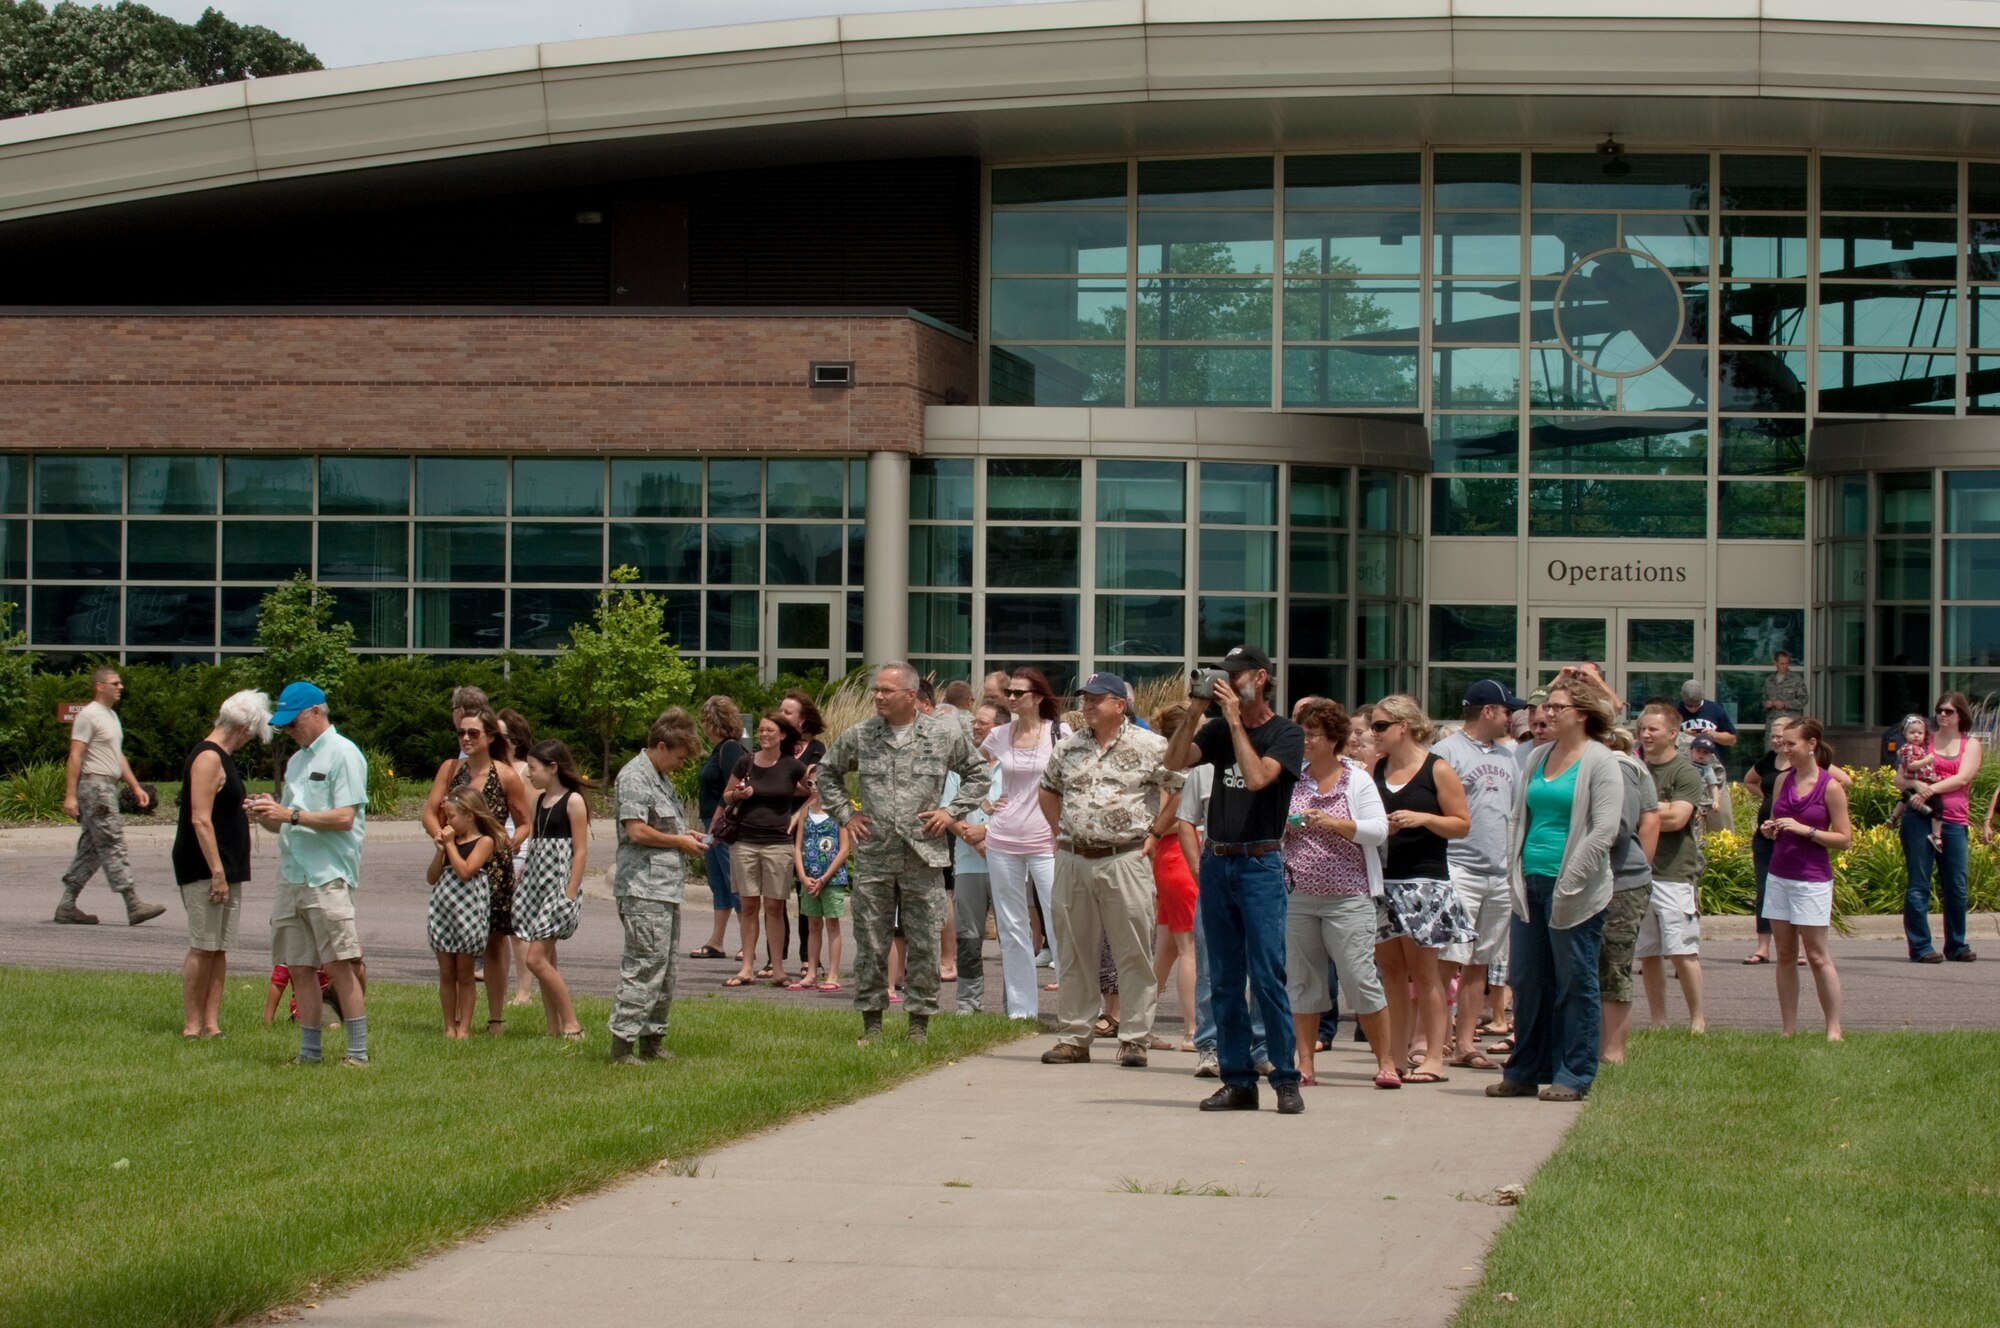 A crowd of friends and family on the Minnesota Air National Guard base watches a C-130 "Hercules" perform a fly-by and then land at the Minneapolis-St. Paul International airport on July 11, 2010 after returning from a tour in Afghanistan. The military cargo aircraft and about twenty Airmen are the first in a series of returns during July for the 133rd Airlift Wing in 2010. USAF official photo by Senior Master Sgt. Mark Moss